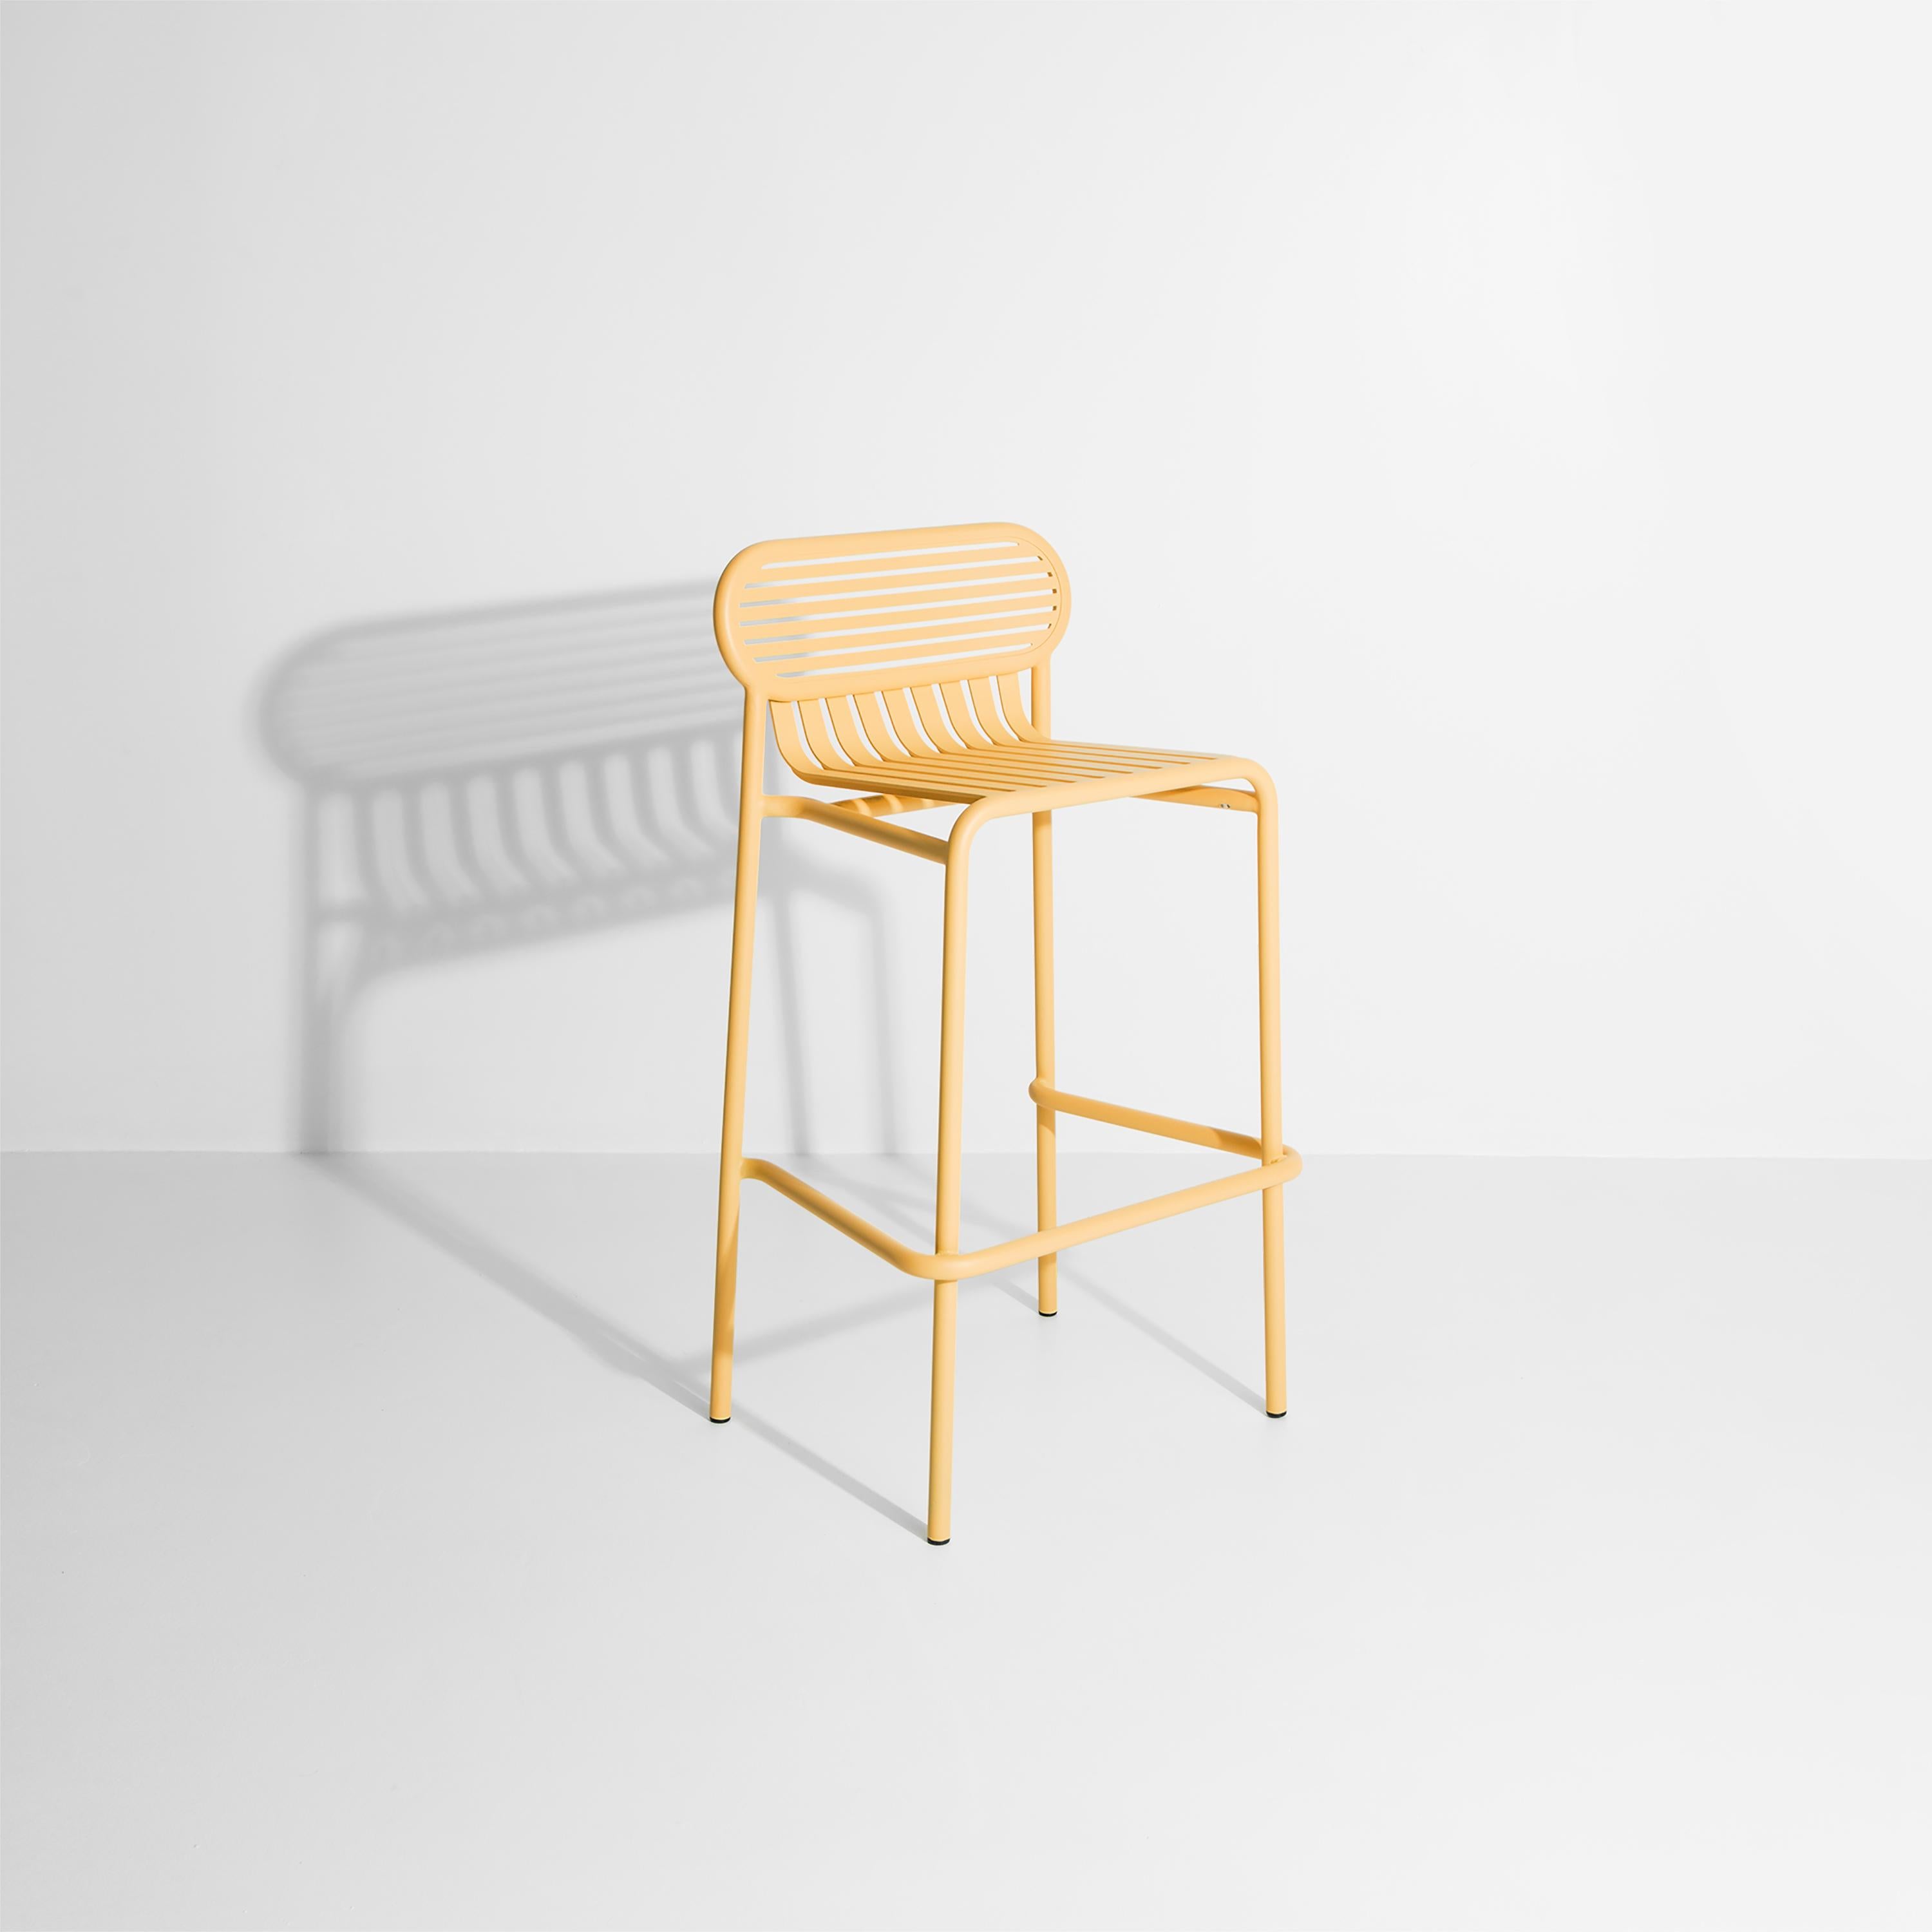 Petite Friture Week-End Bar Stool in Saffron Aluminium by Studio BrichetZiegler, 2017

The week-end collection is a full range of outdoor furniture, in aluminium grained epoxy paint, matt finish, that includes 18 functions and 8 colours for the